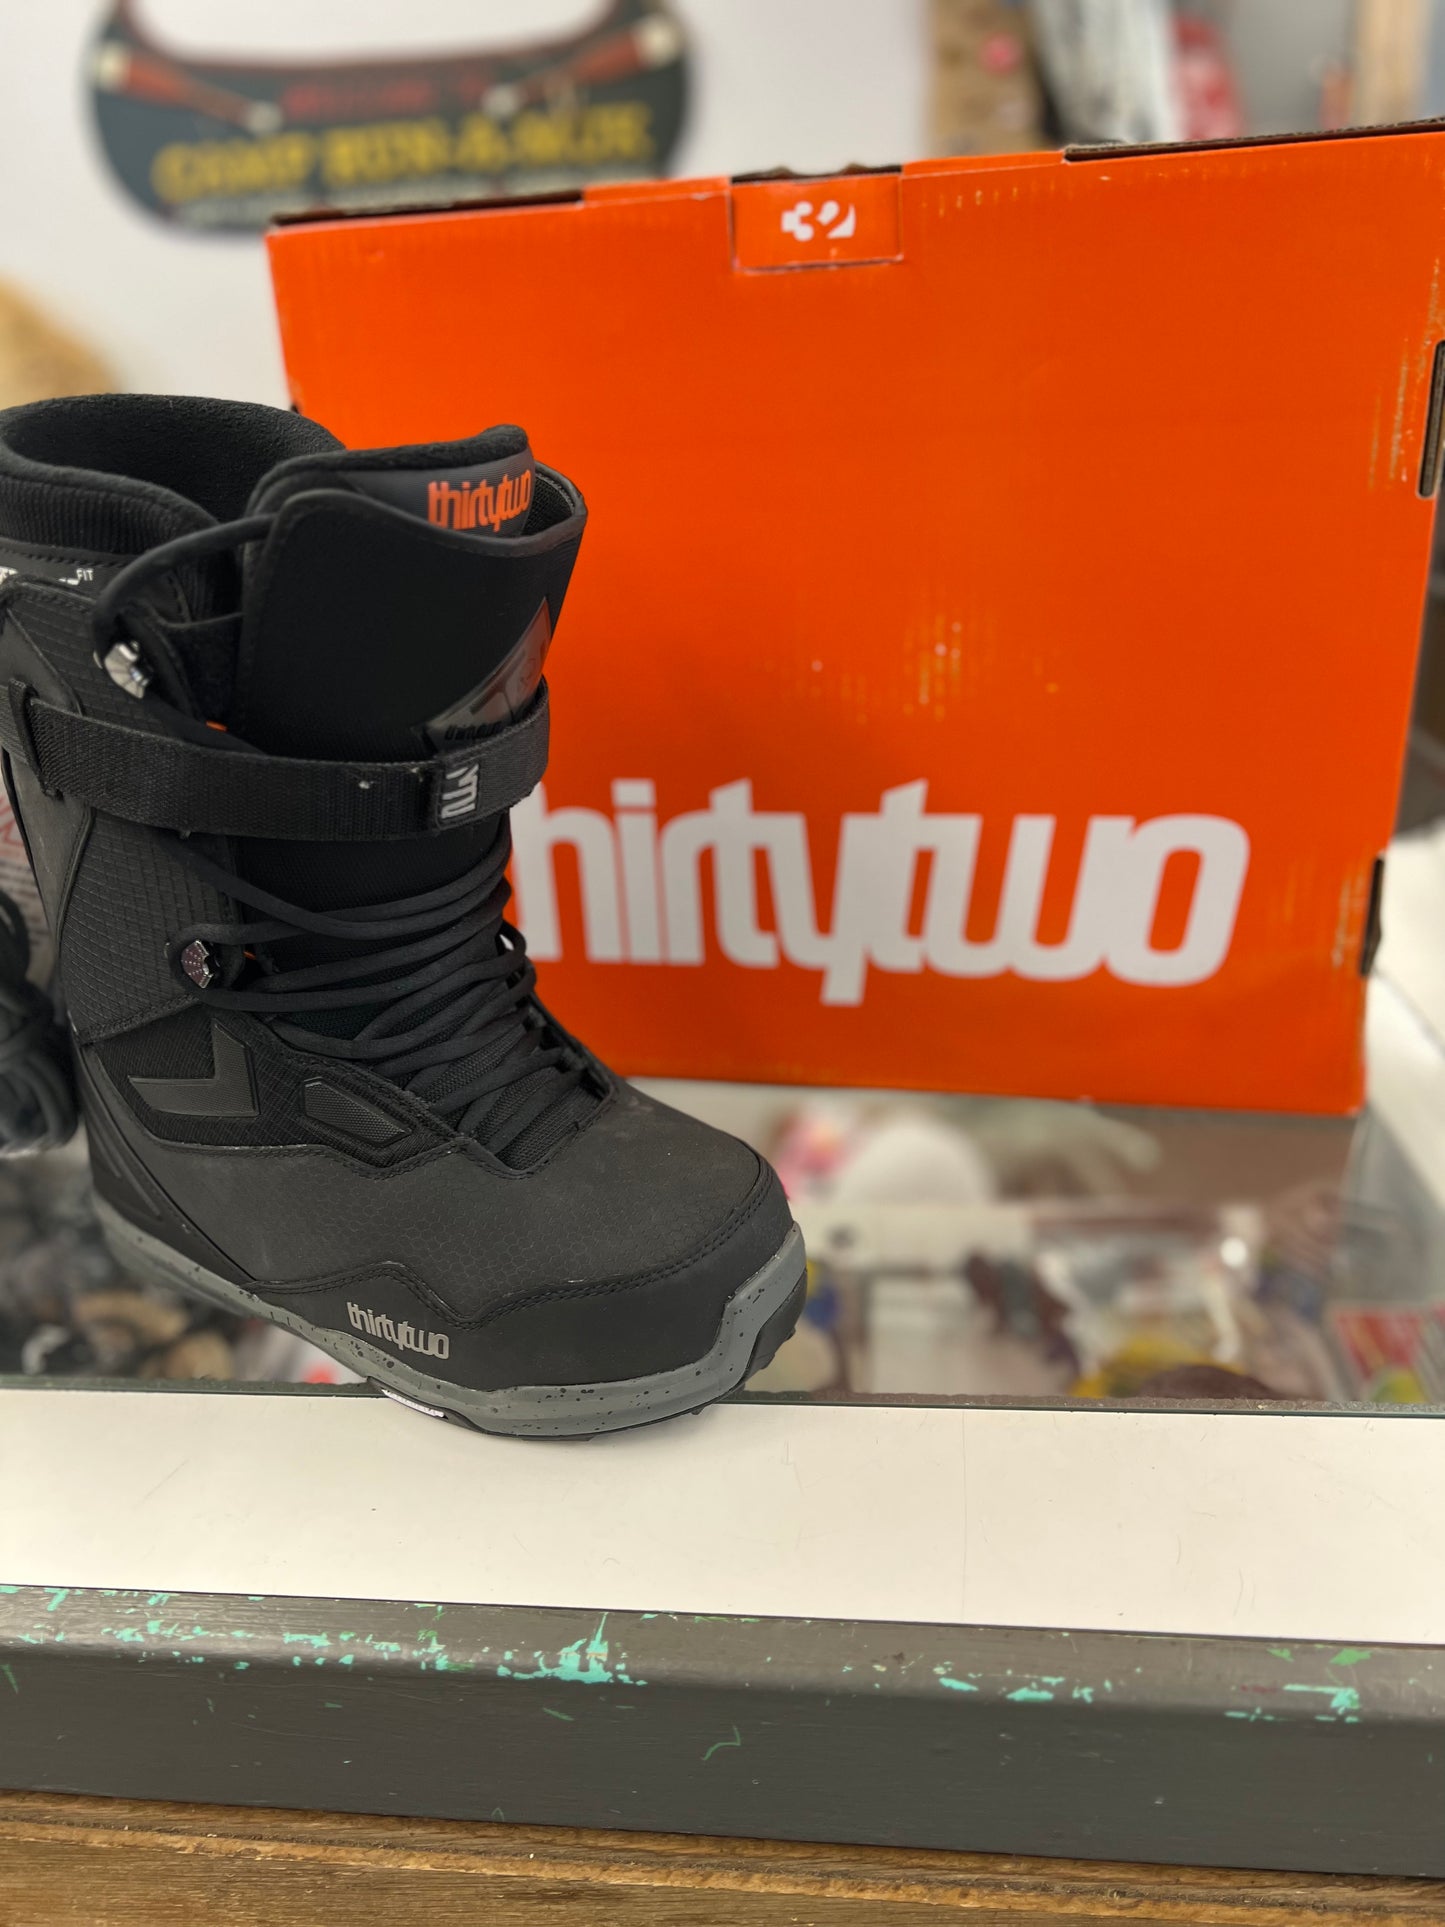 Thirty-Two Snowboard boots